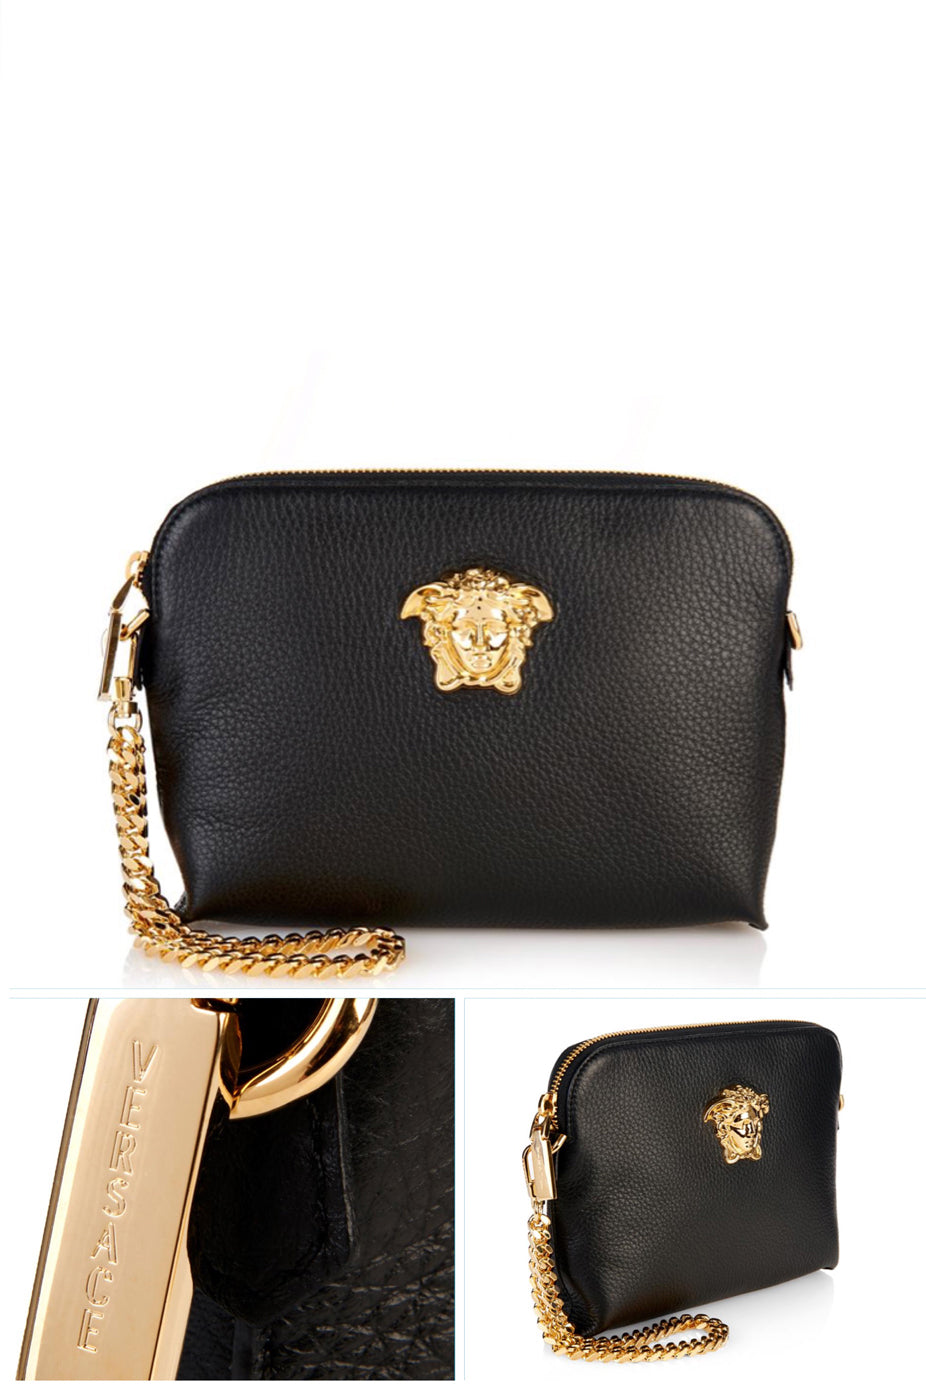 LEATHER CLUTCH by Versace